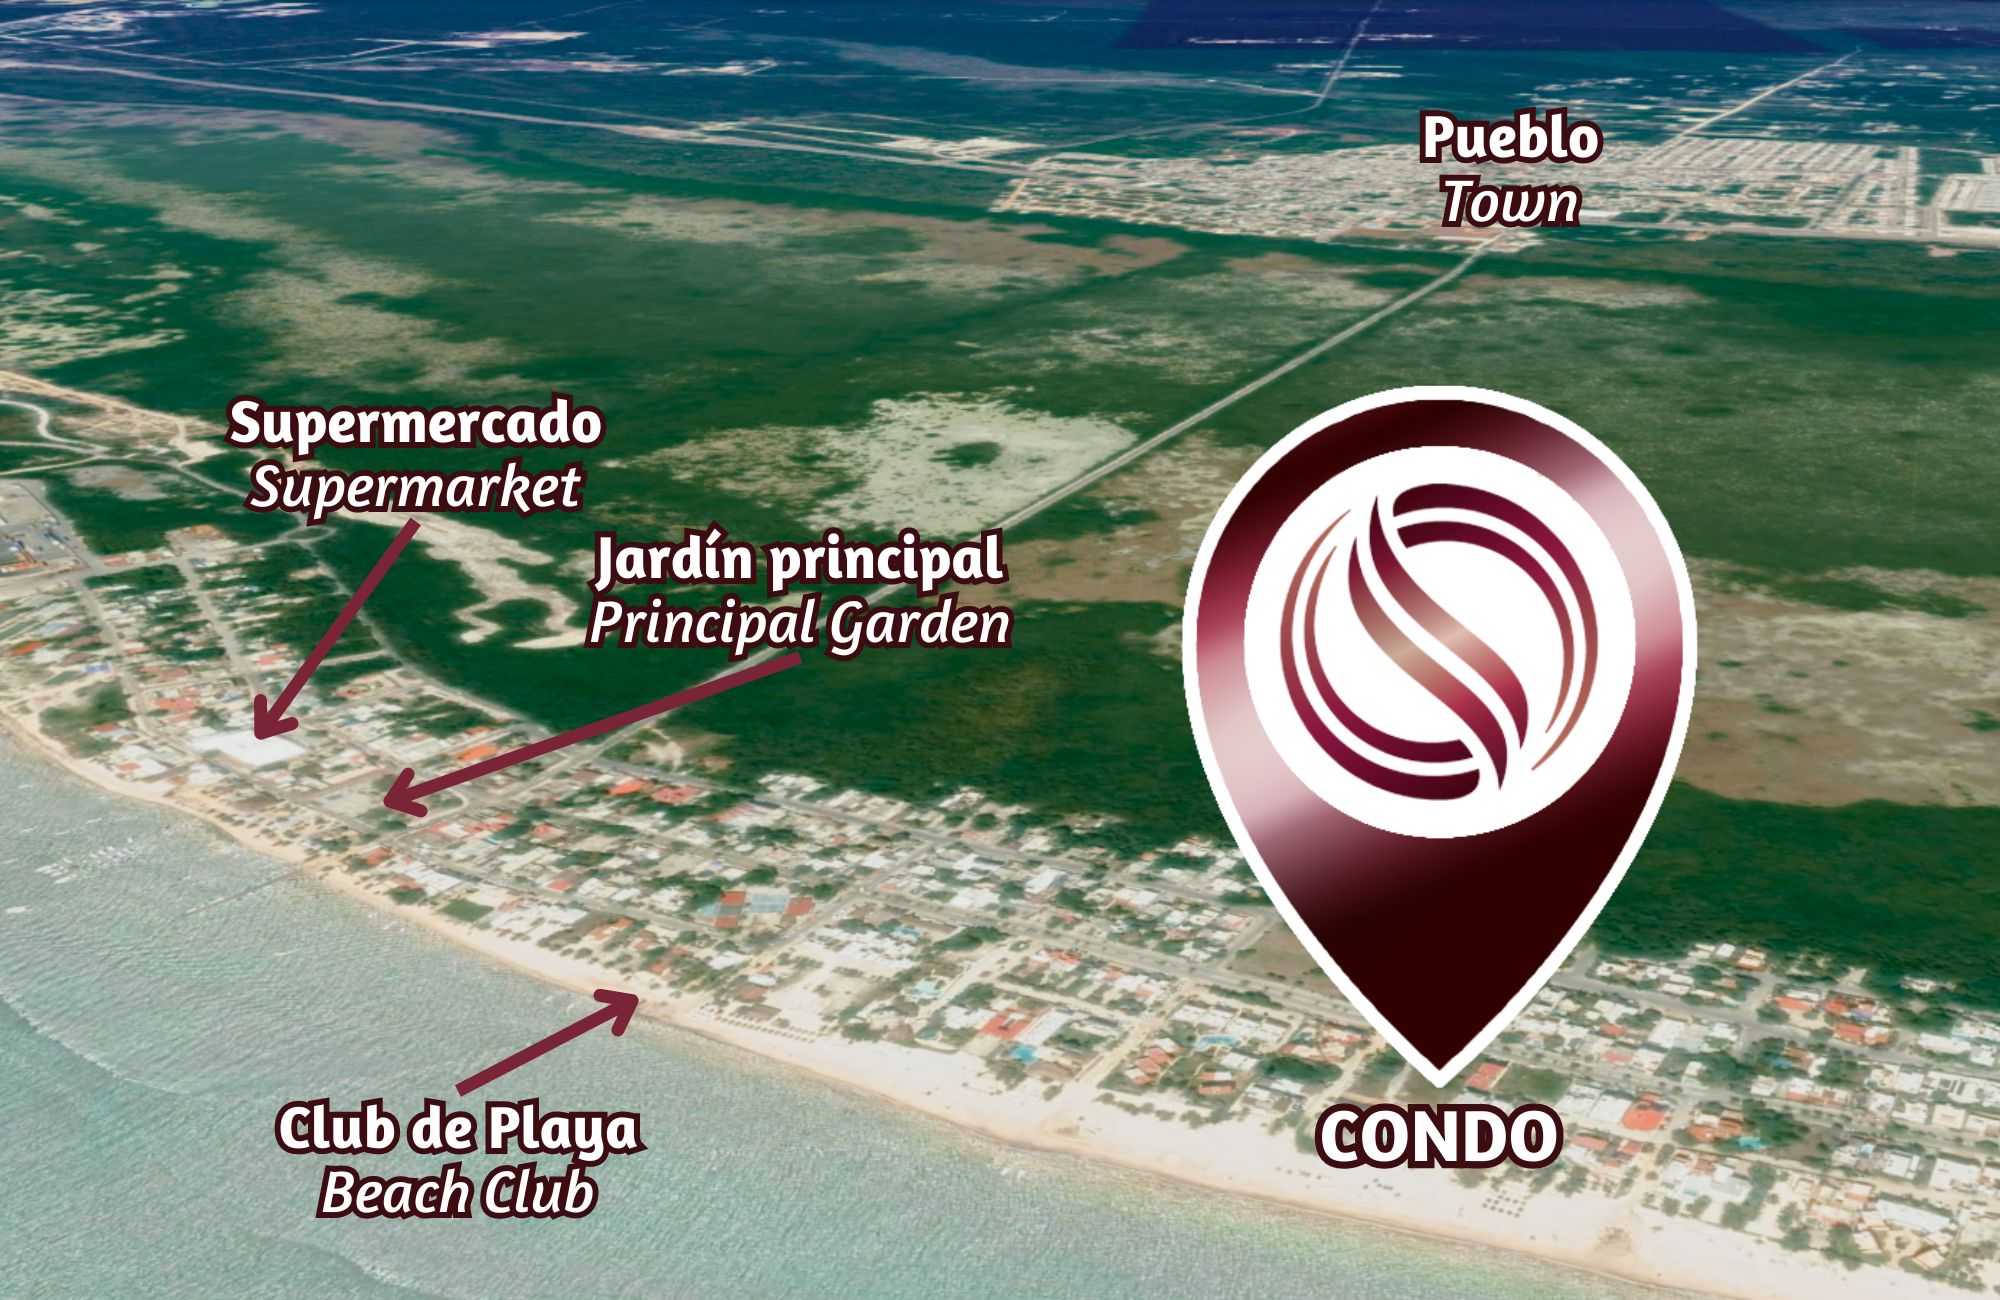 Condominium steps from the beach, with 2 terraces, ocean view pool, 200 meters from the beach, pre-construction, sale Puerto Morelos.